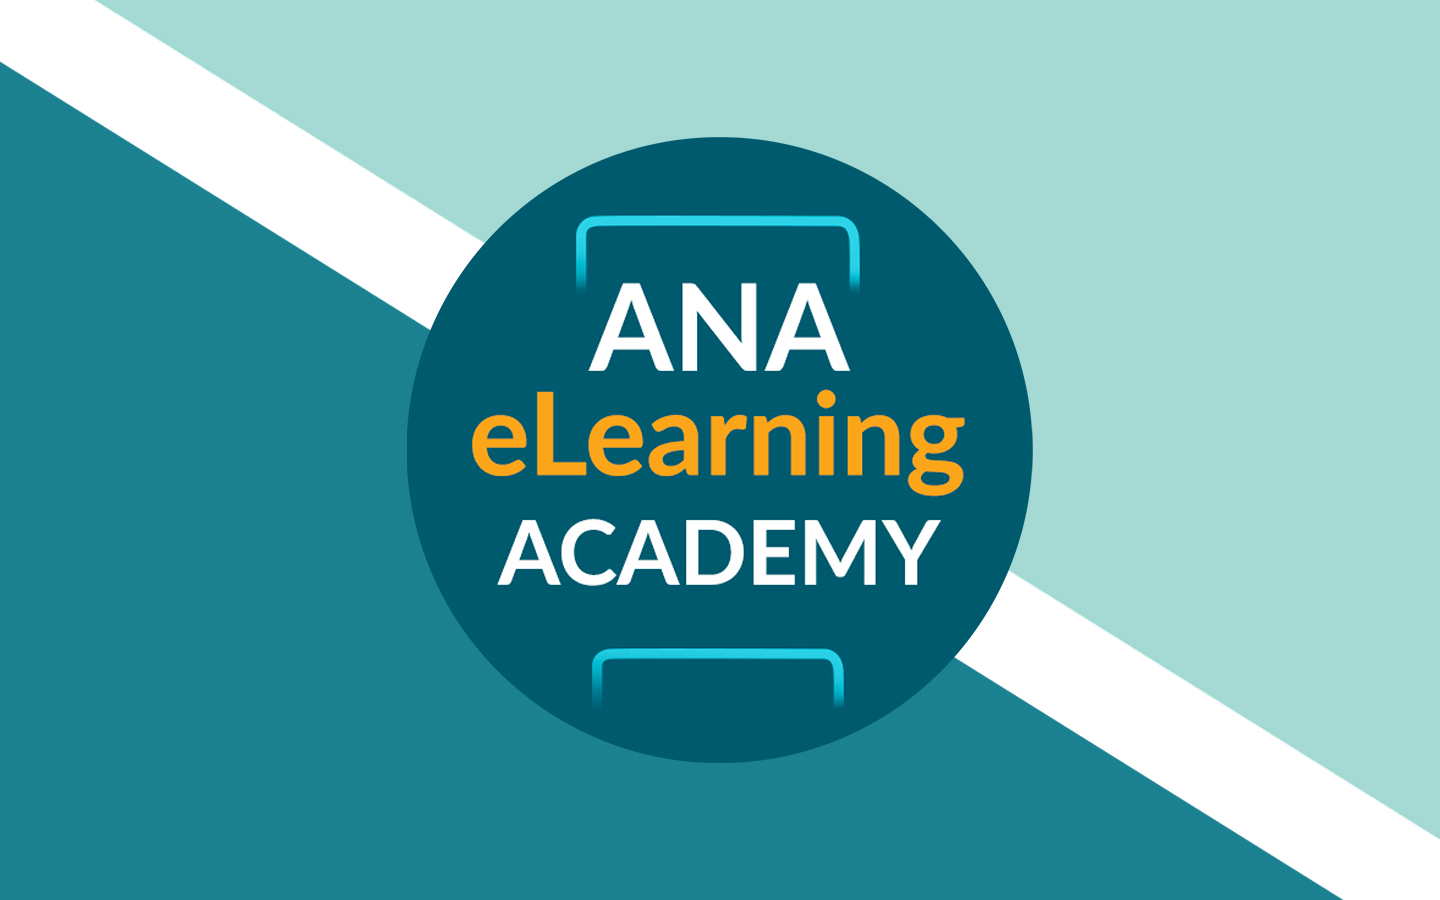 ANA eLearning Academy Launches on April 29